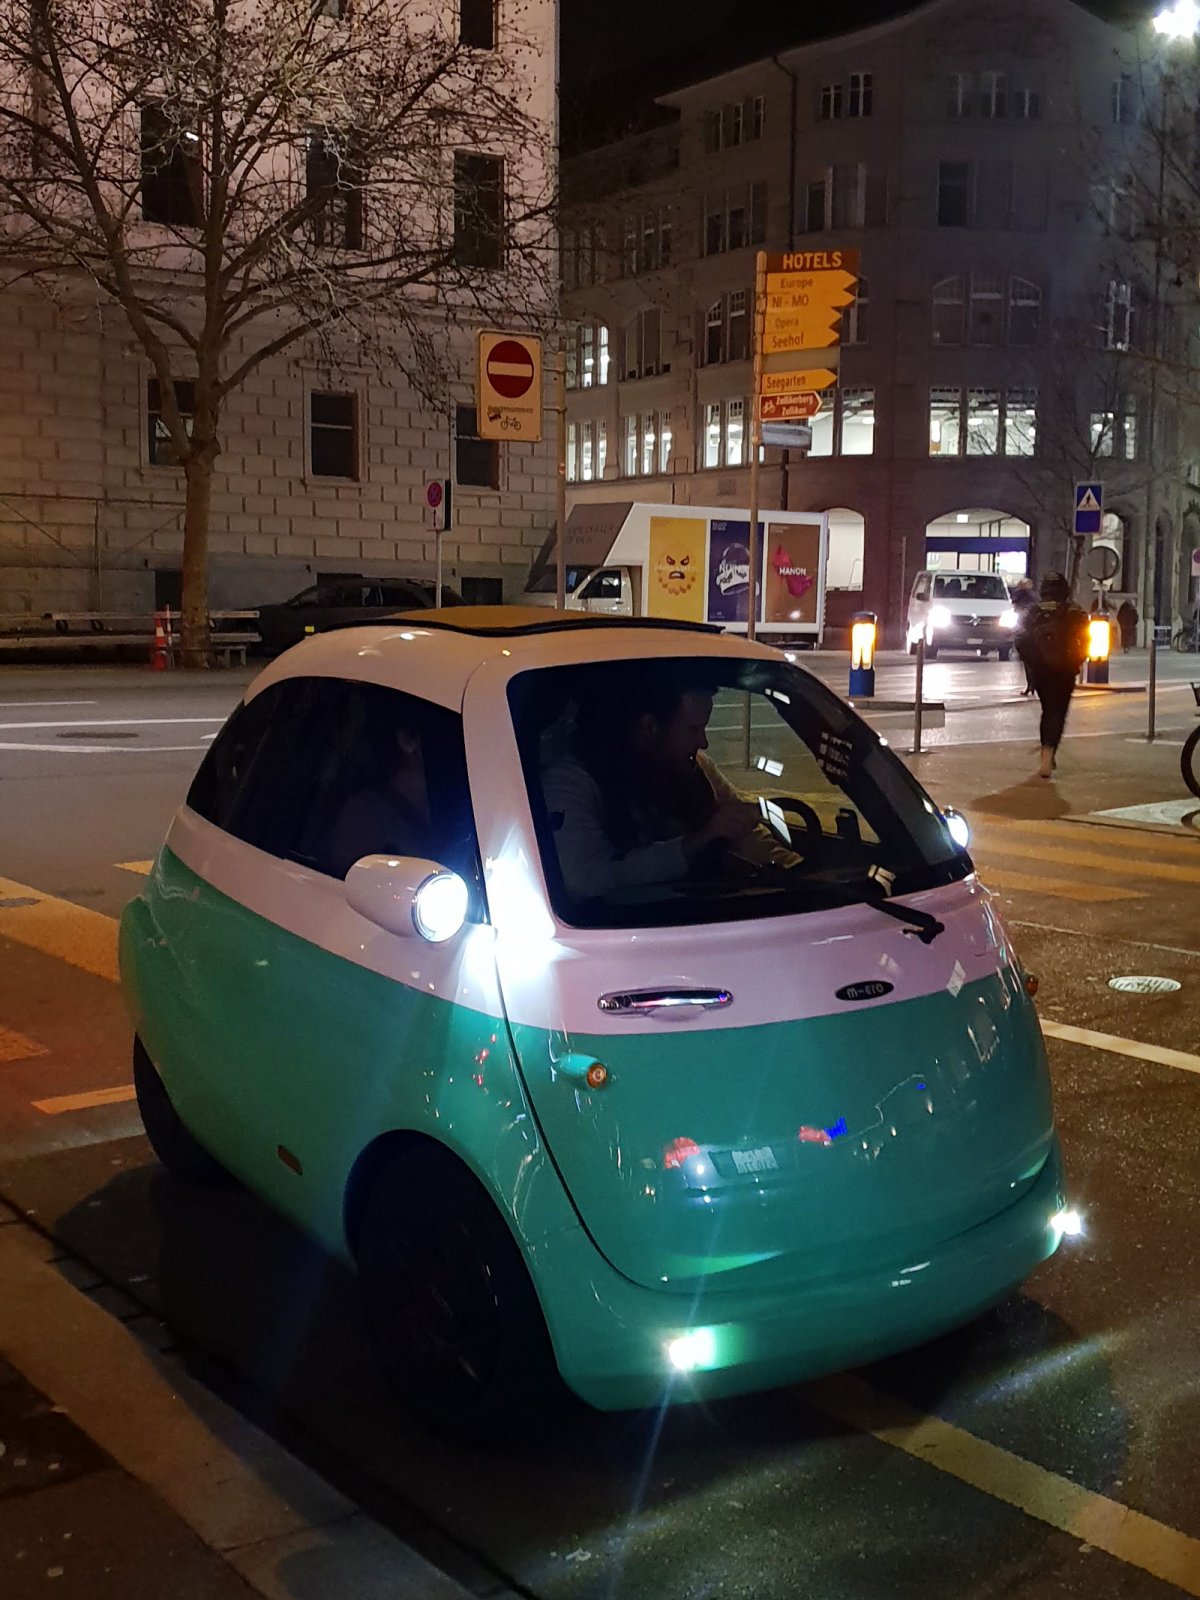 The Microlino car in the streets of Zürich